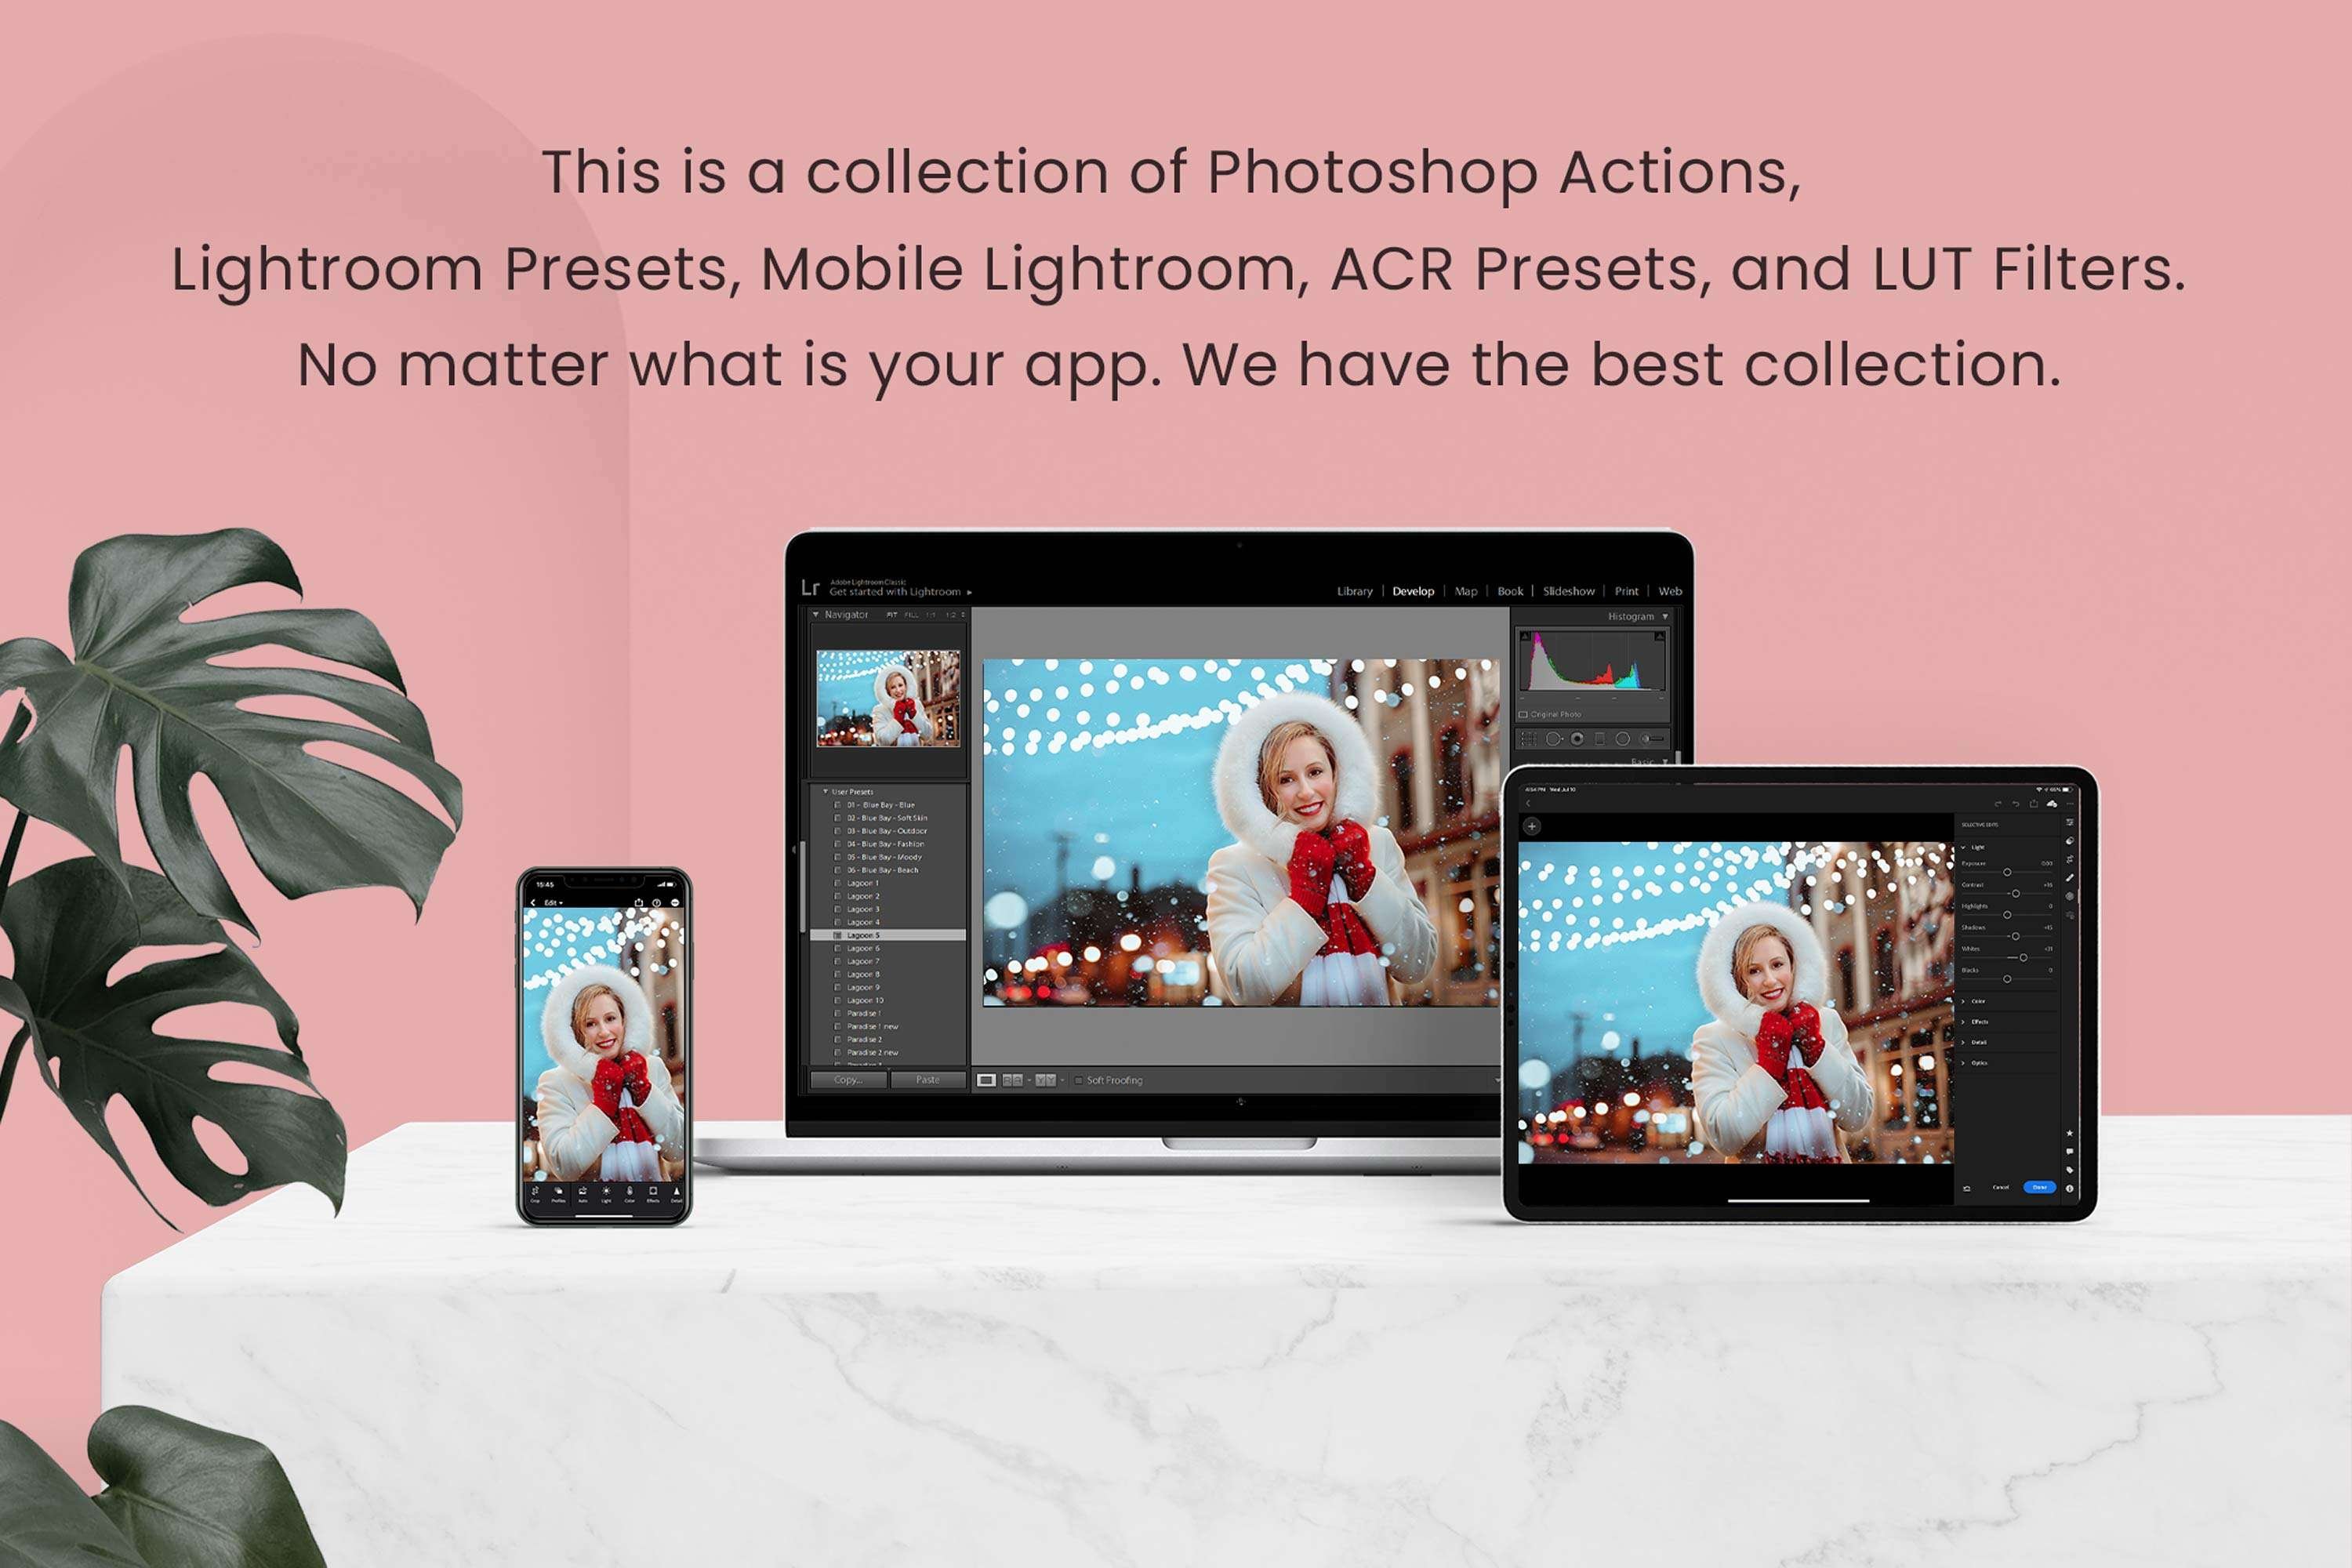 10 New Year Lightroom Presets & LUTspreview image.